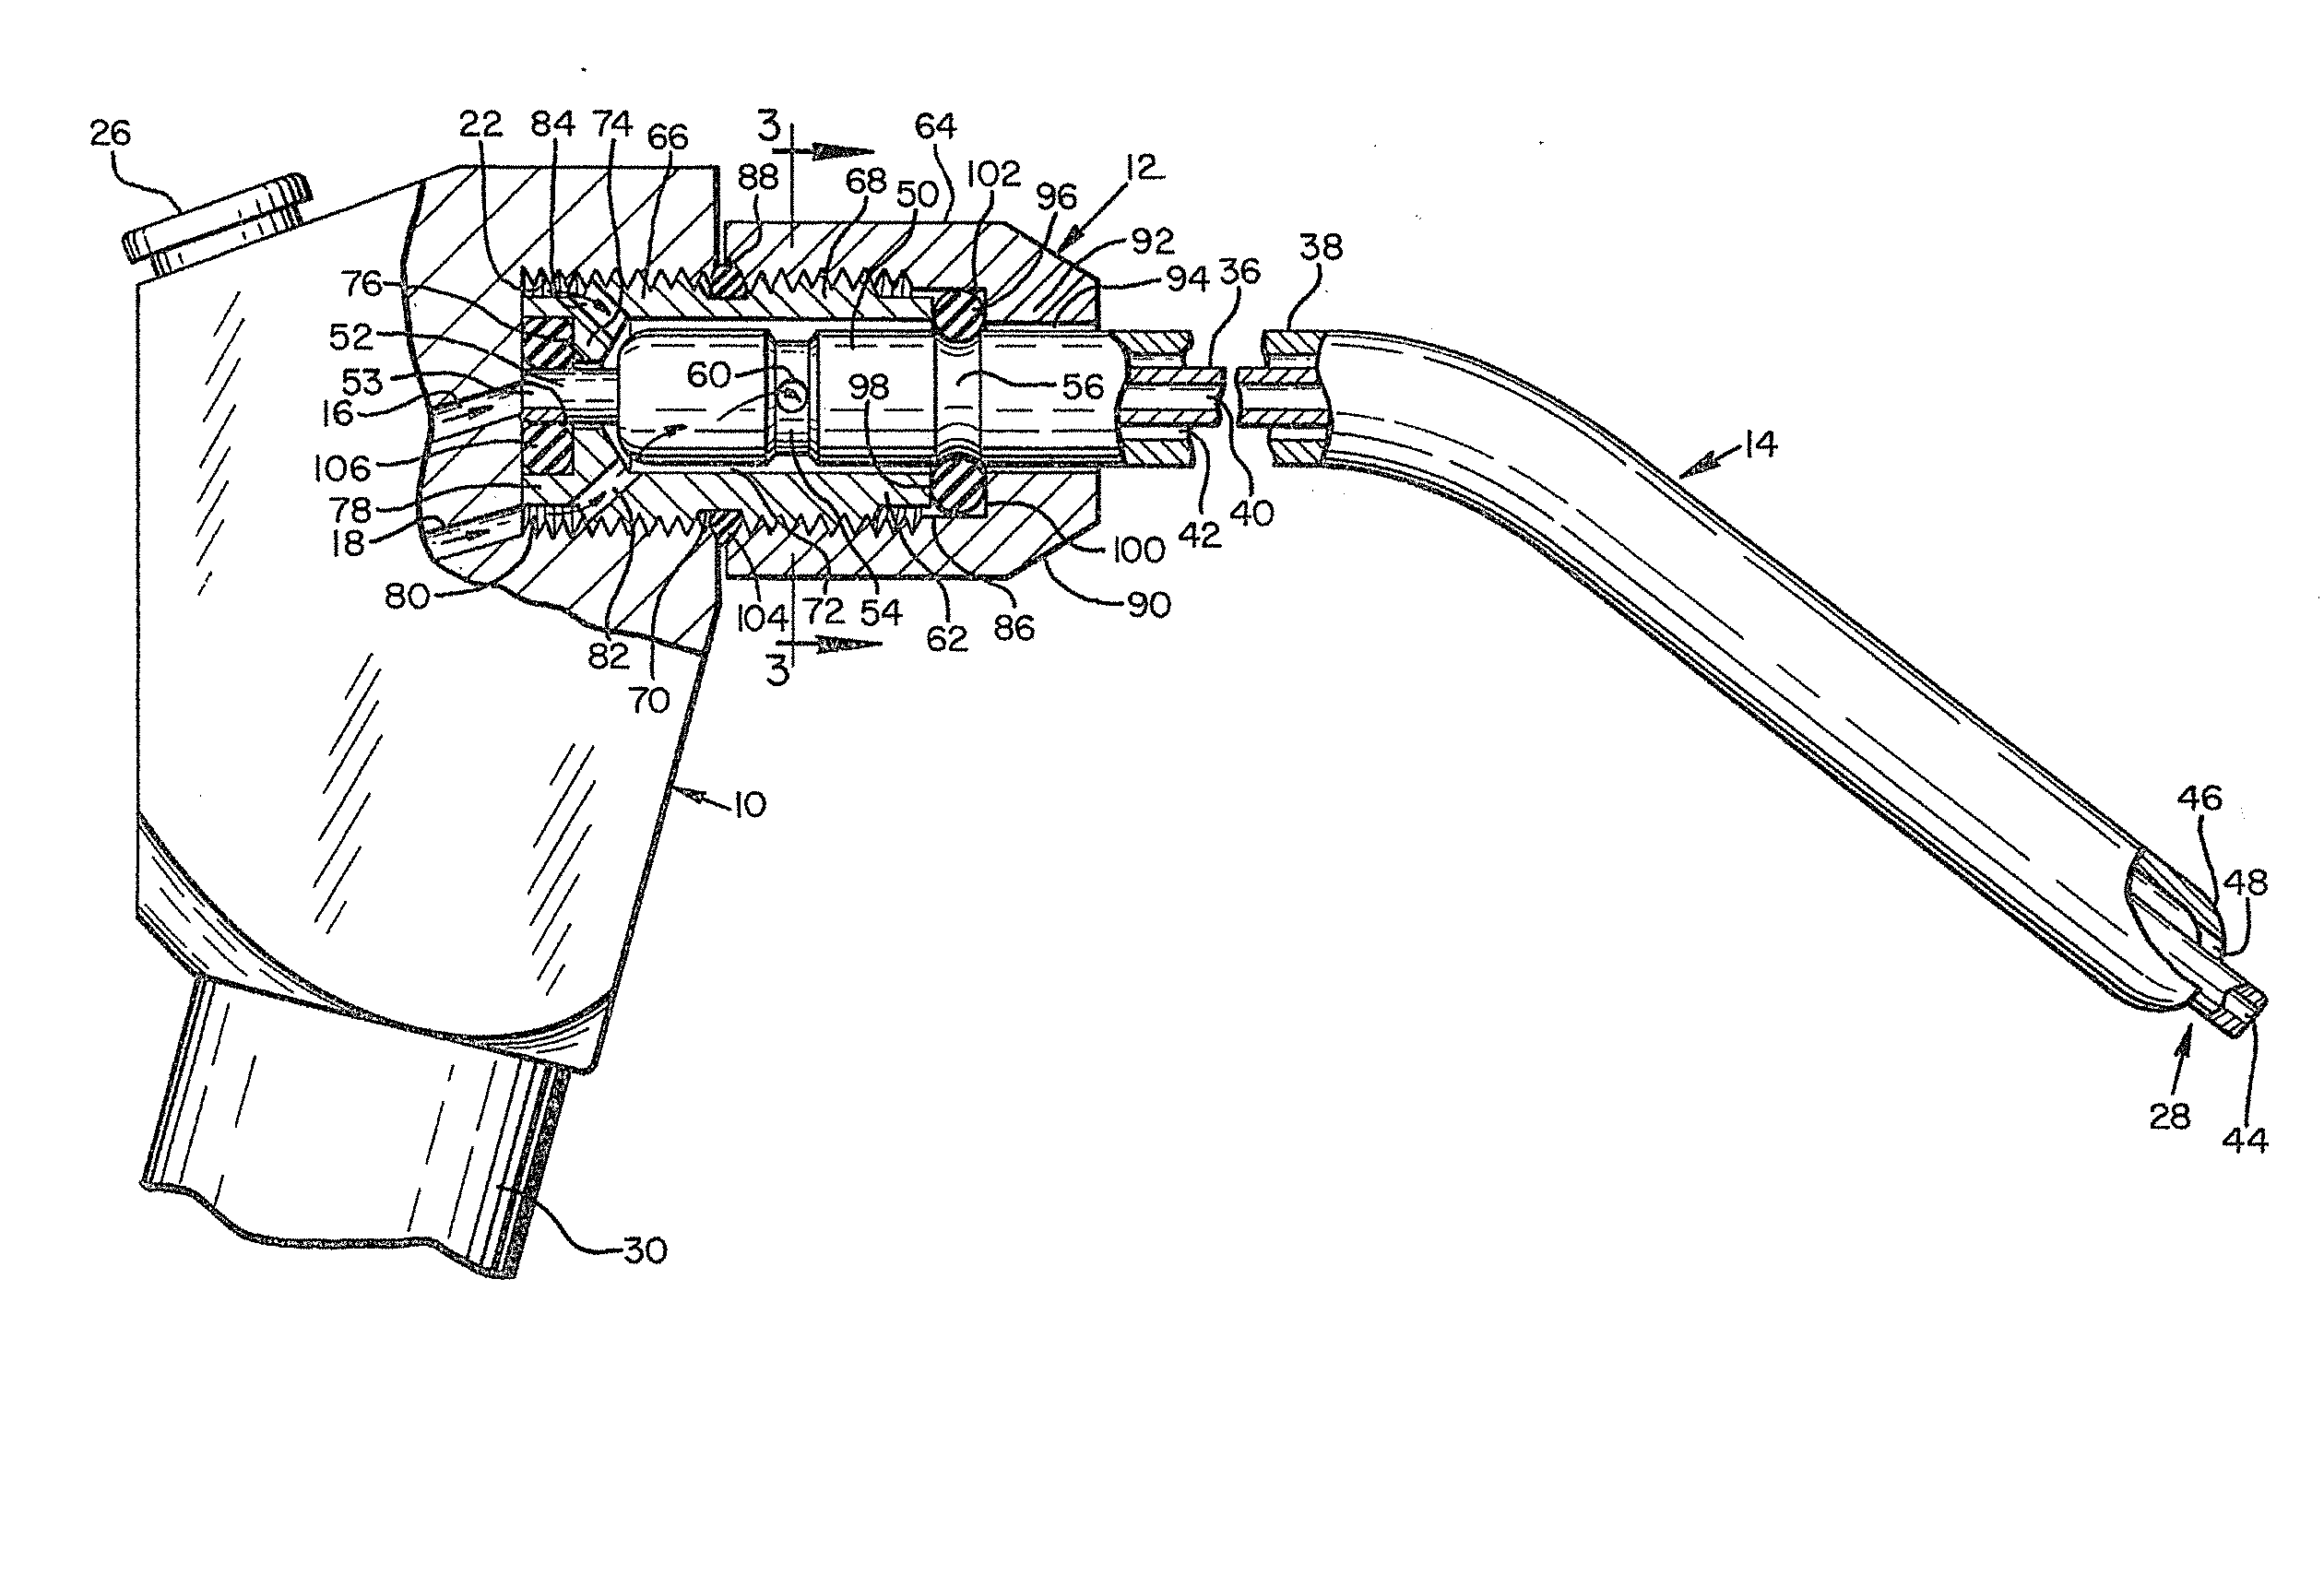 Air/water dental syringe tip adapter systems and conversion methods